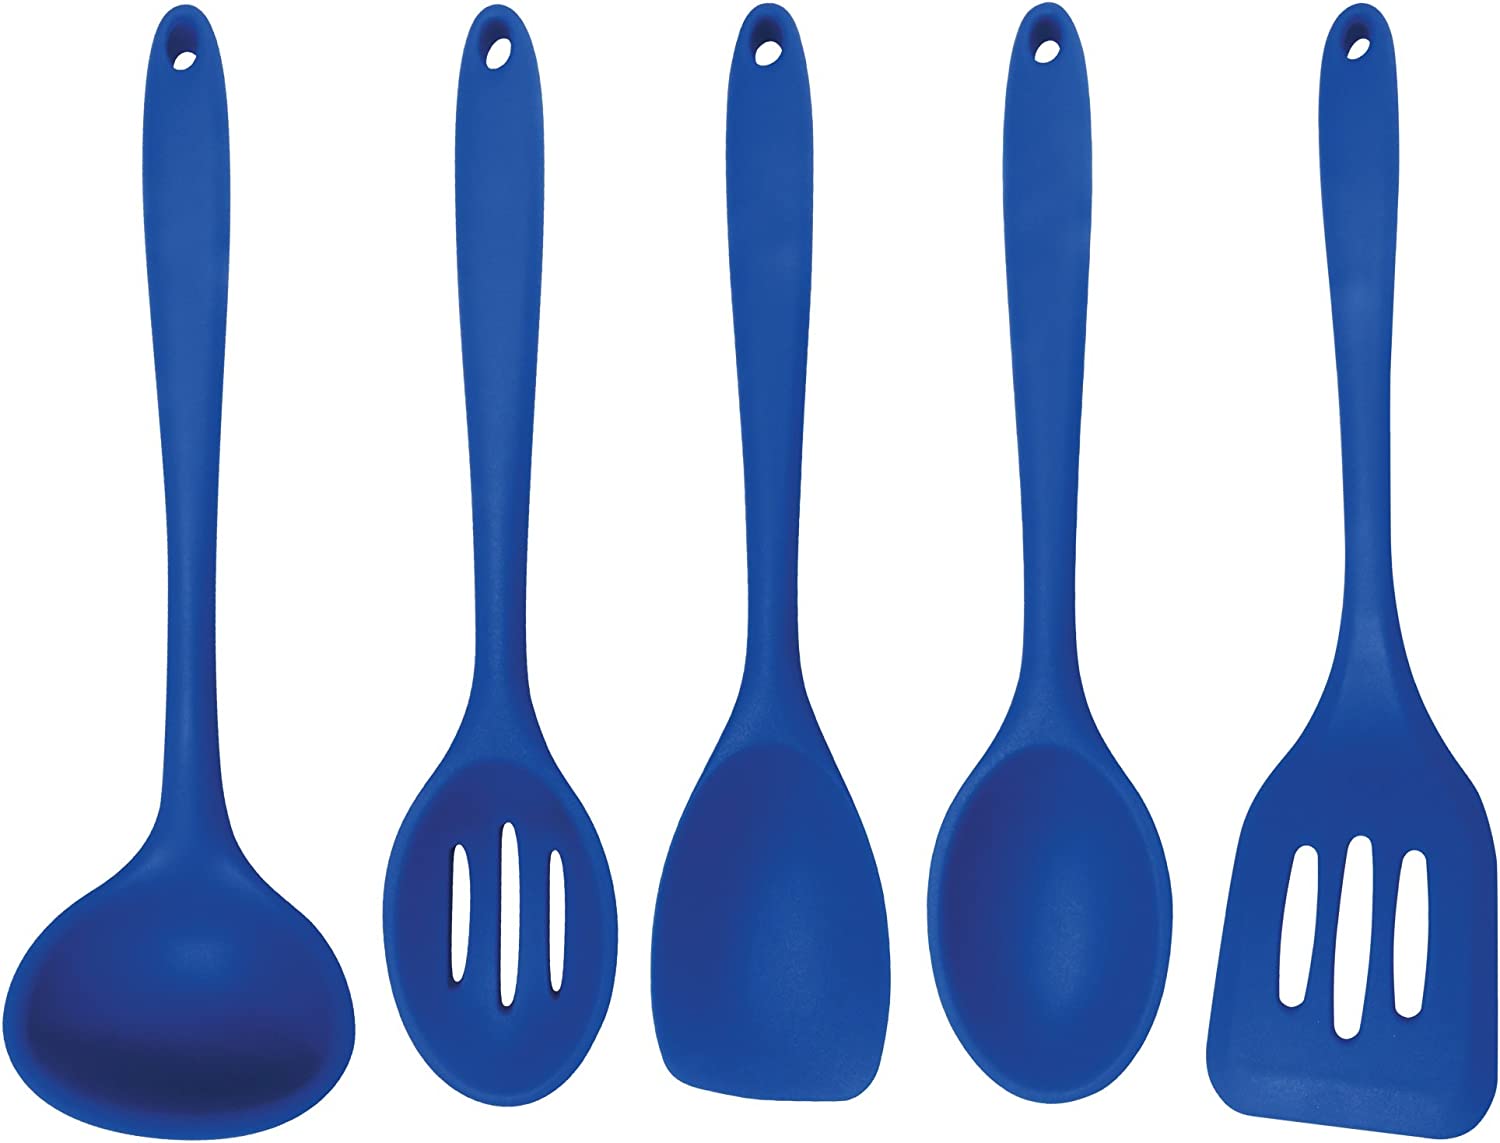 Better Houseware 5Piece Silicone Cooking Utensil Set, Blue